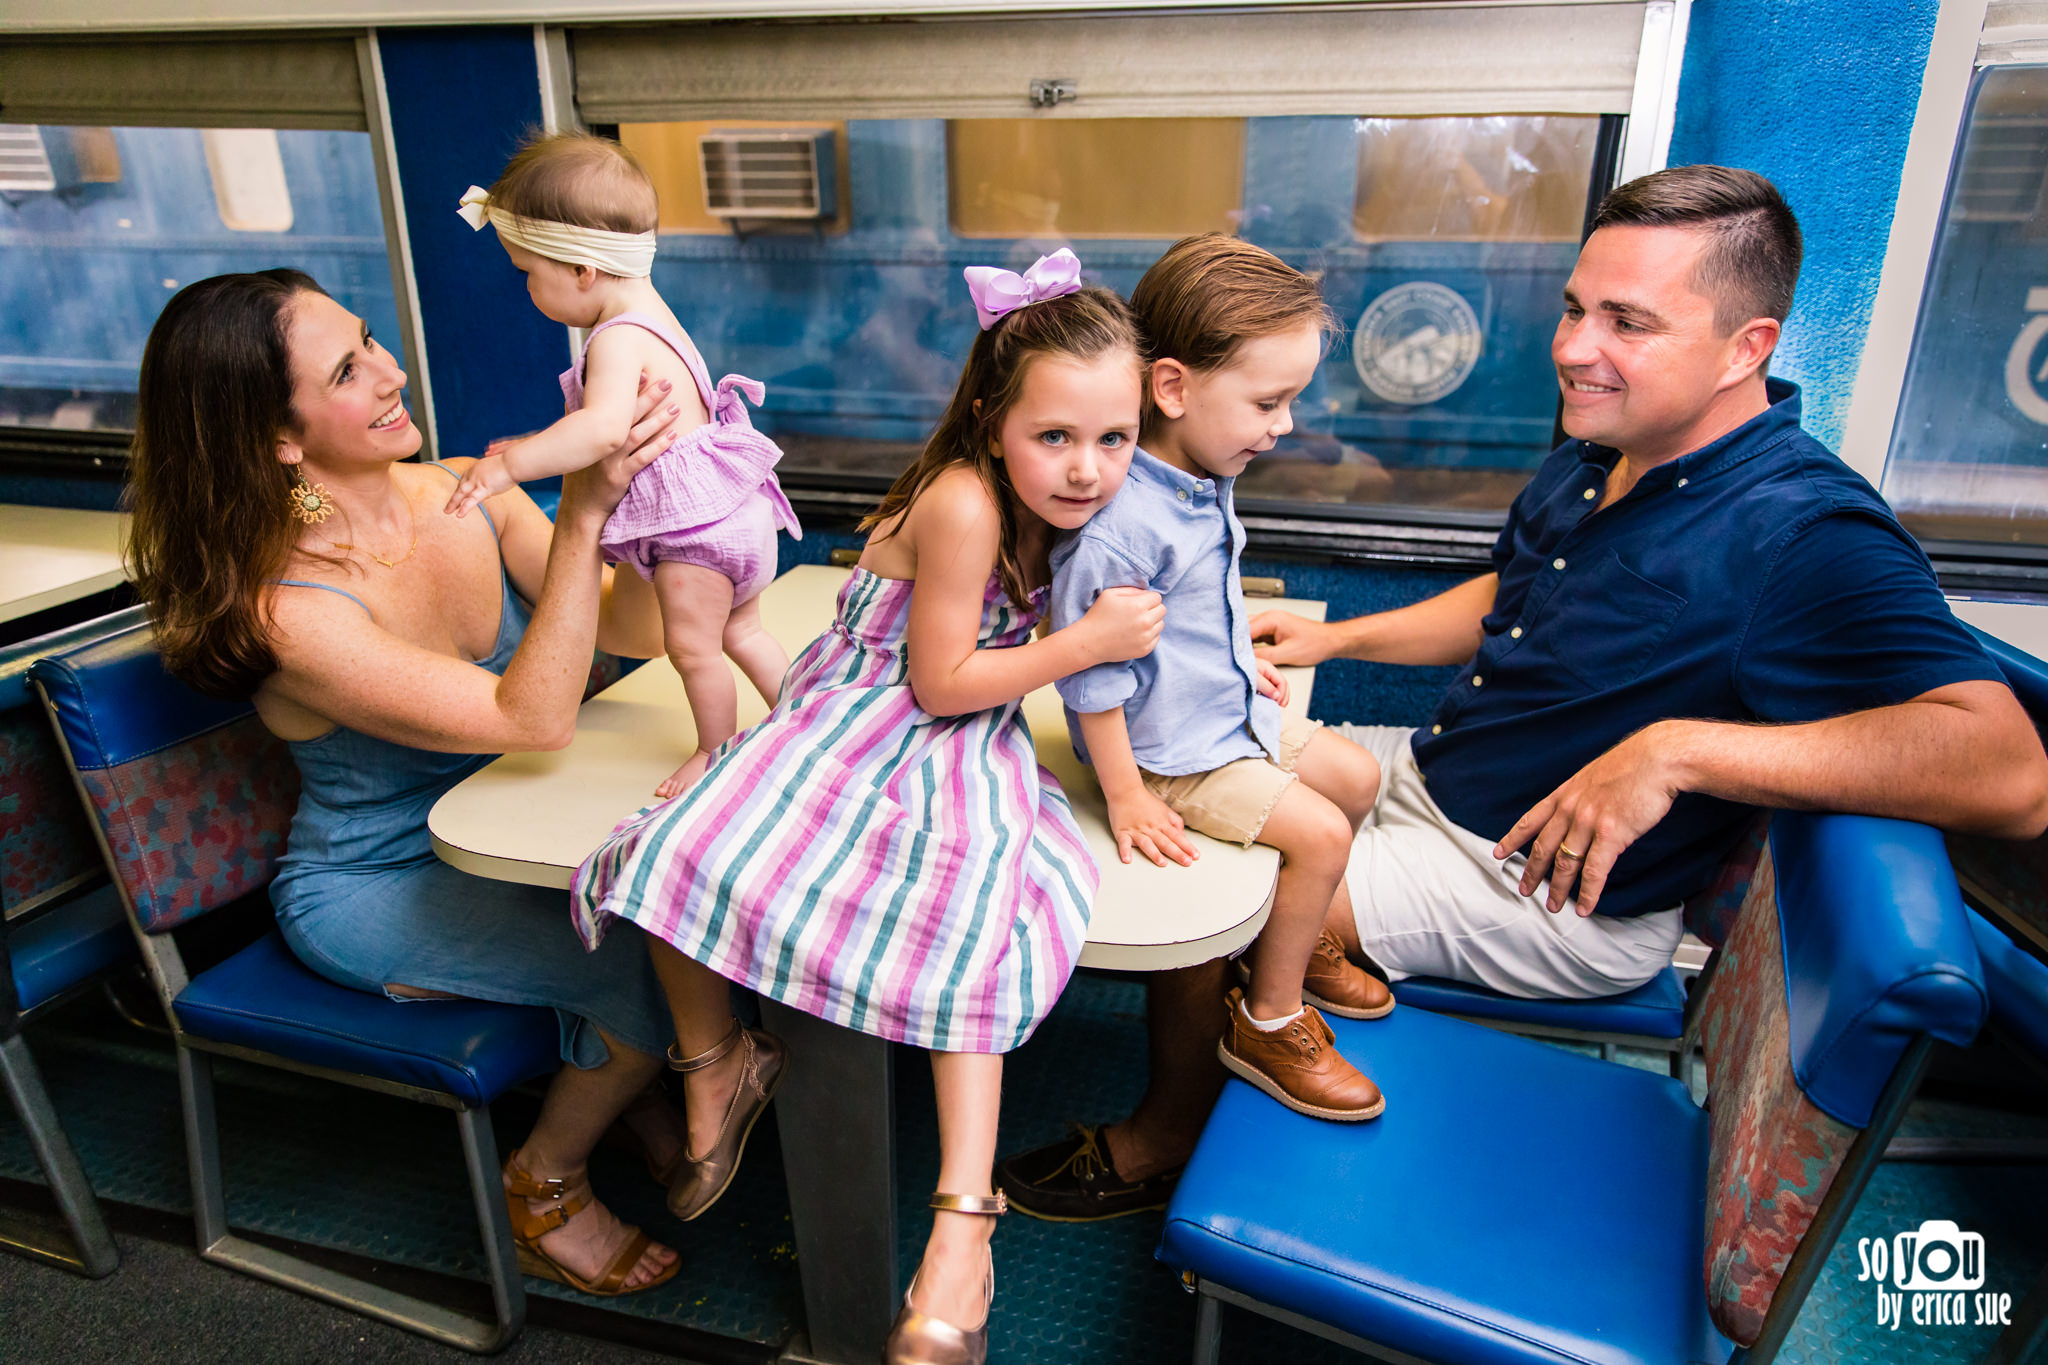 so-you-by-erica-sue-gold-coast-railroad-museum-miami-family-photo-shoot-session-7173.JPG